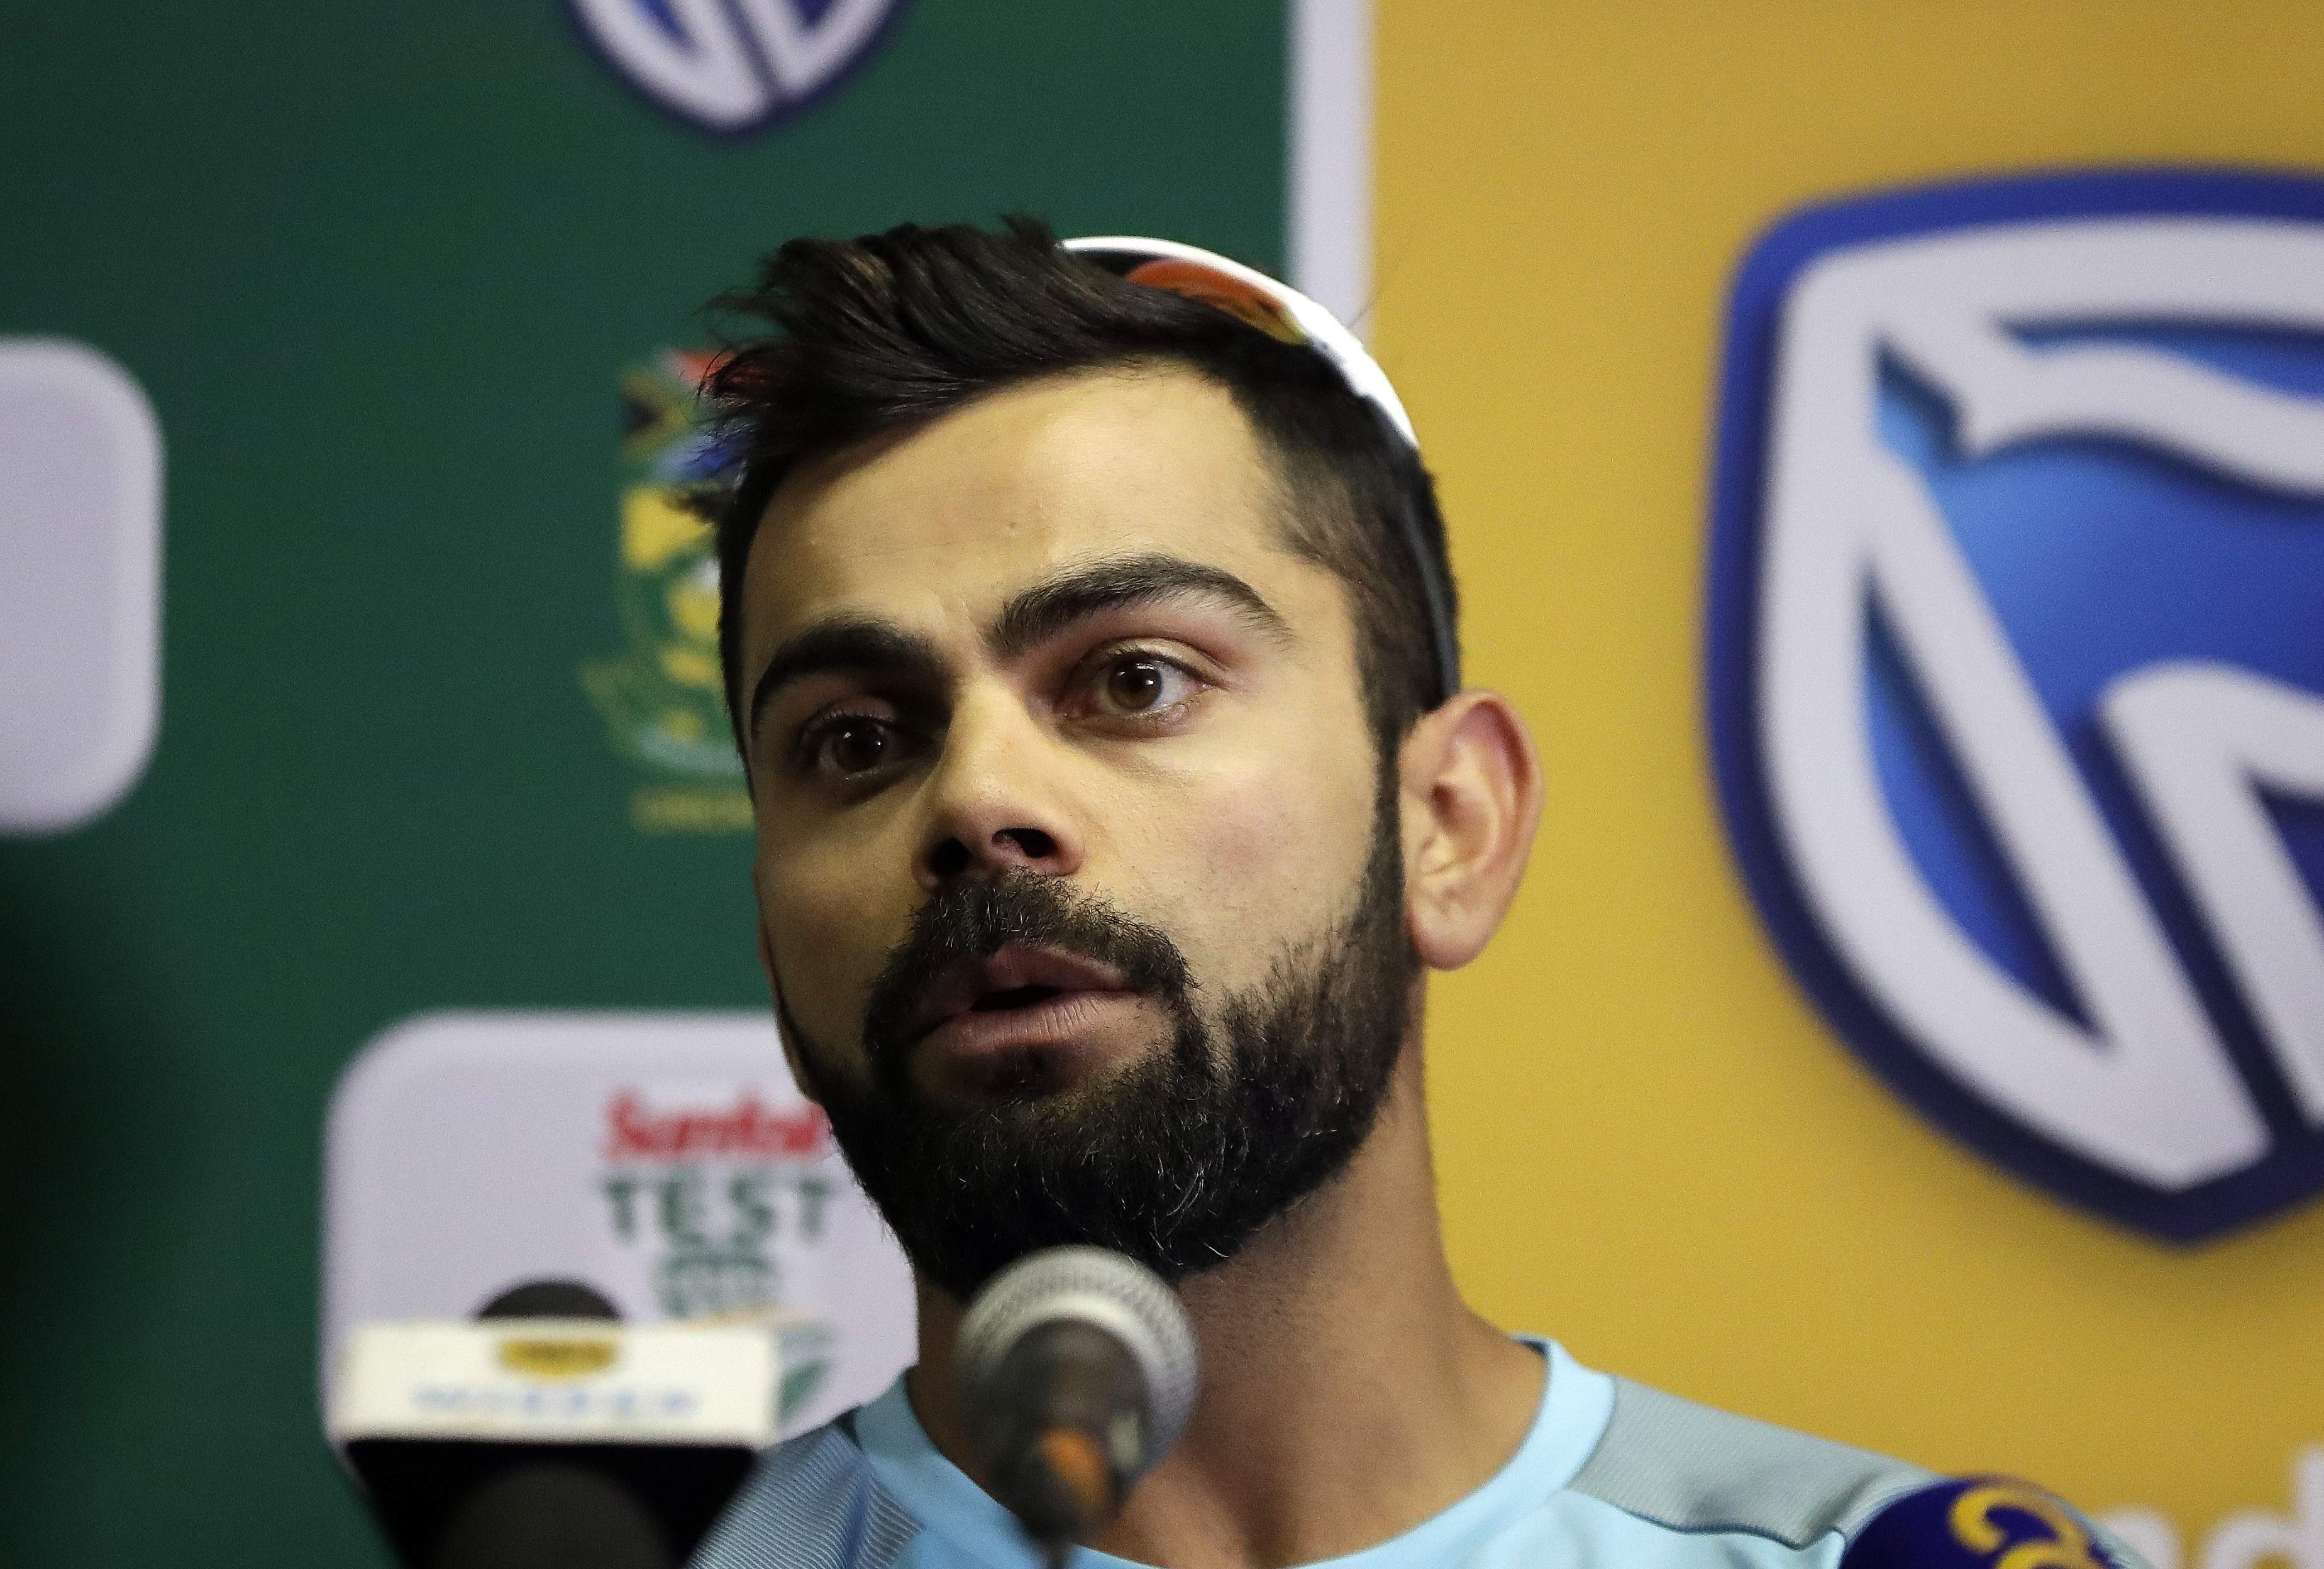 Kohli loses cool, snaps at scribes in fiery press conference